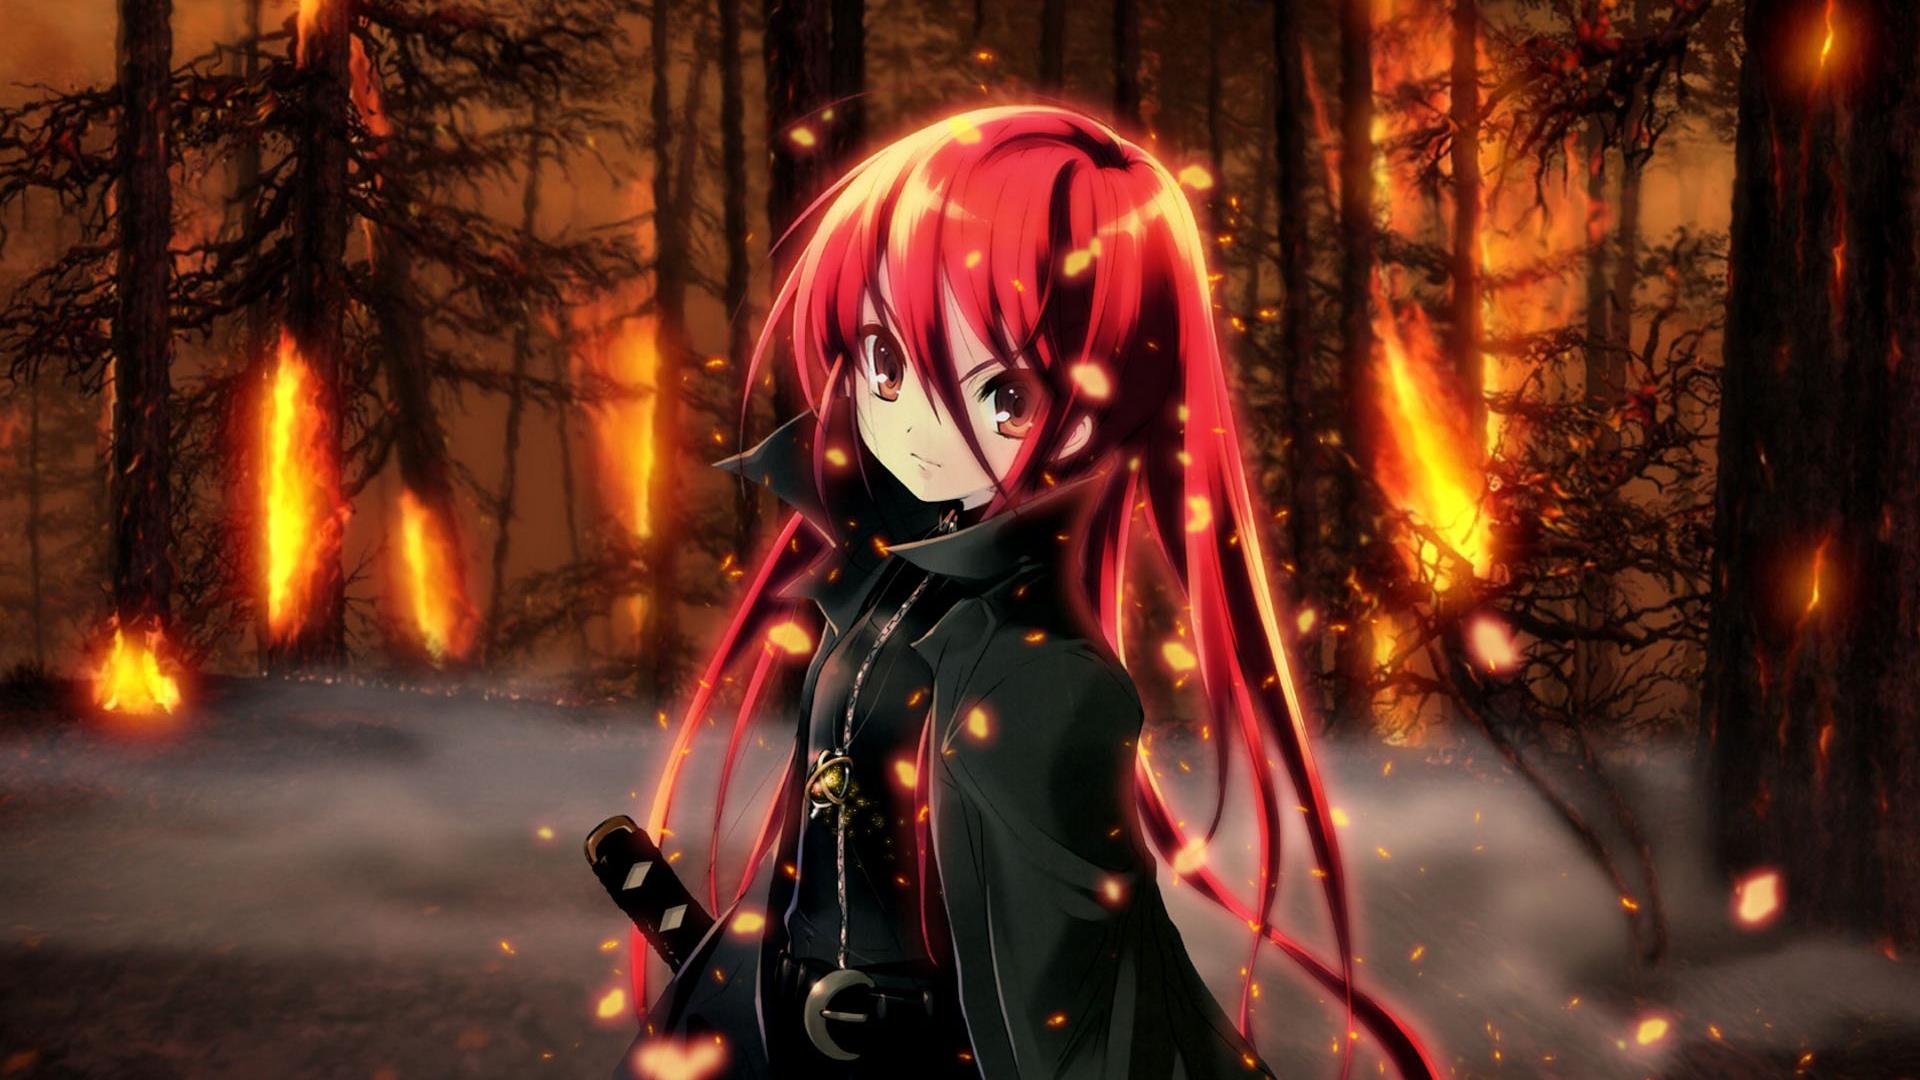 1920 x 1080 · jpeg - Wallpaper In the forest of red hair anime girl 1920x1200 HD Picture, Image